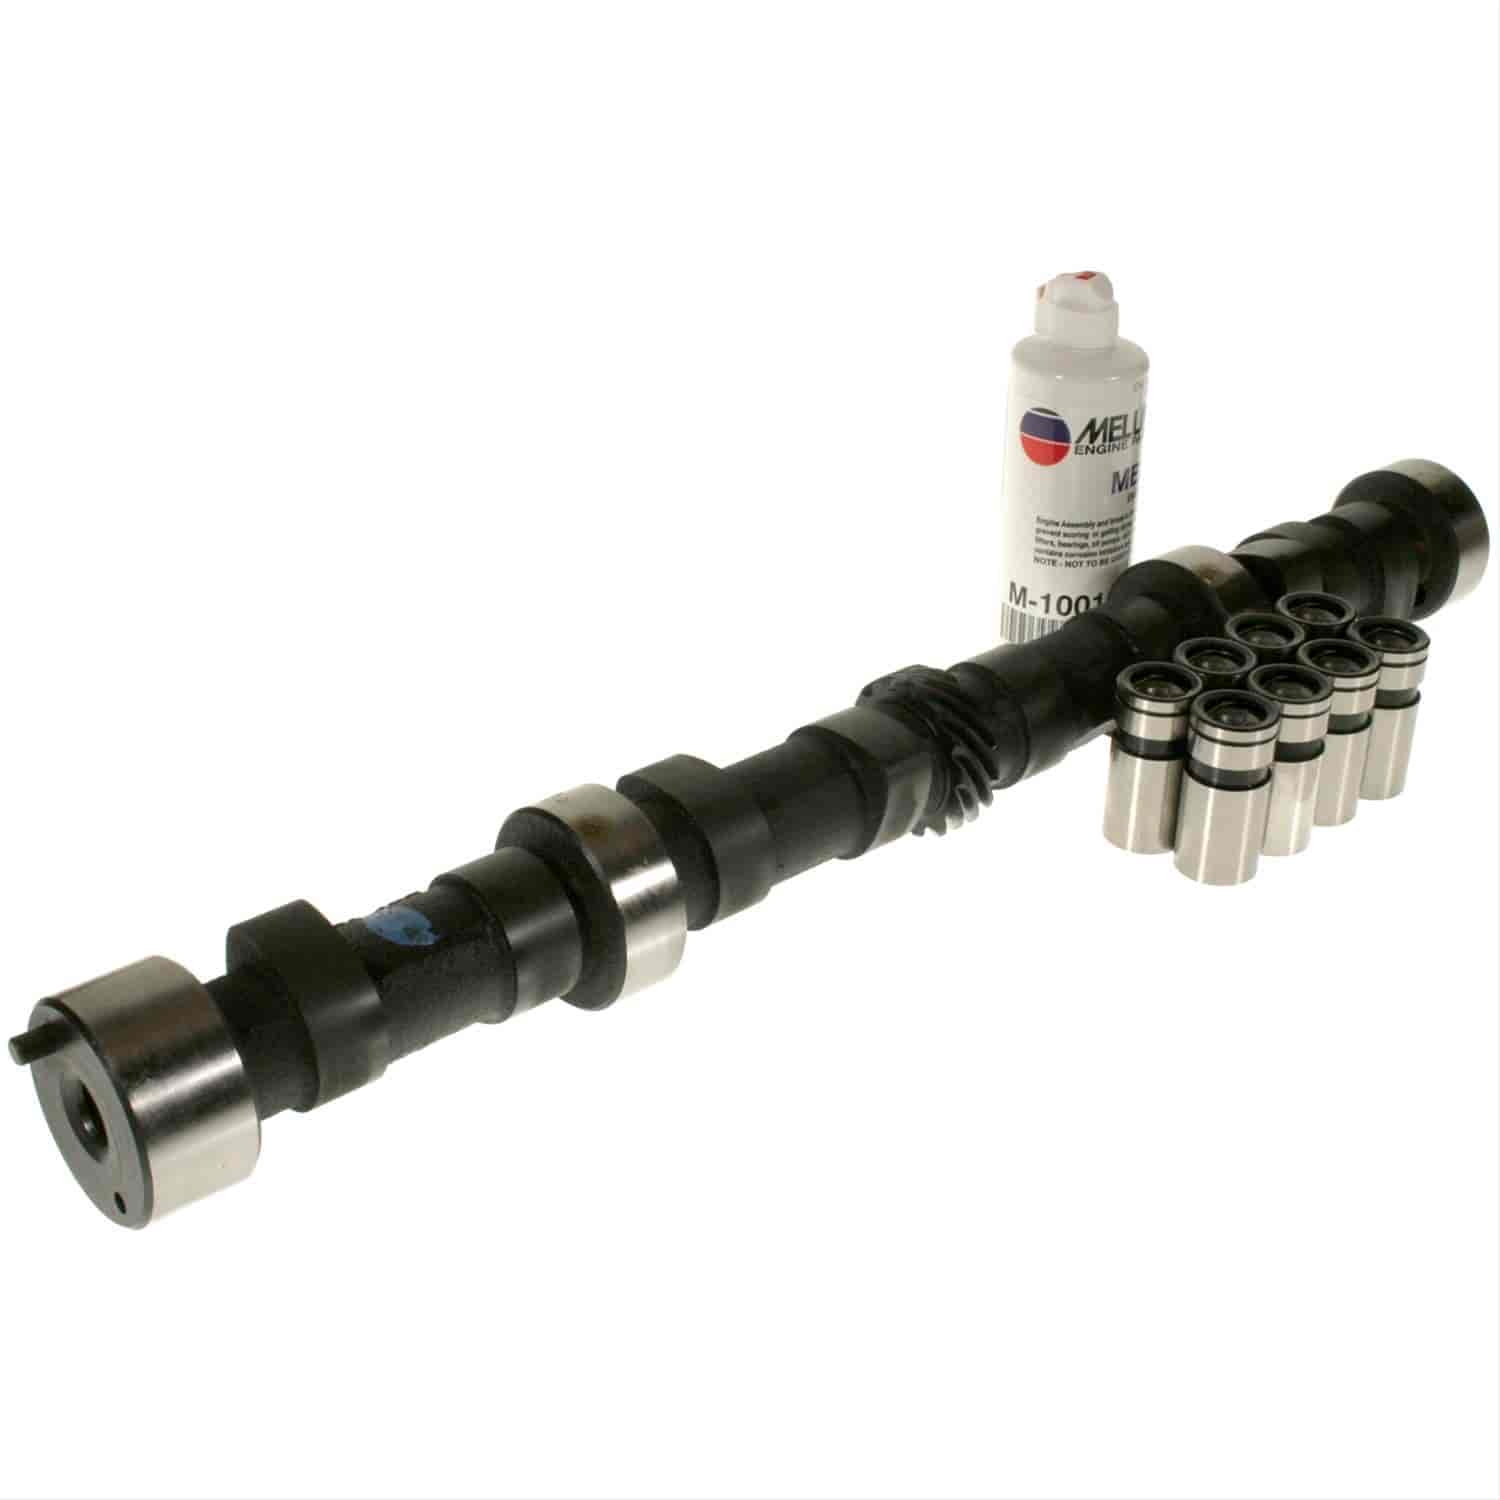 Camshaft and Lifter Kit for AMC 2.5L Engine